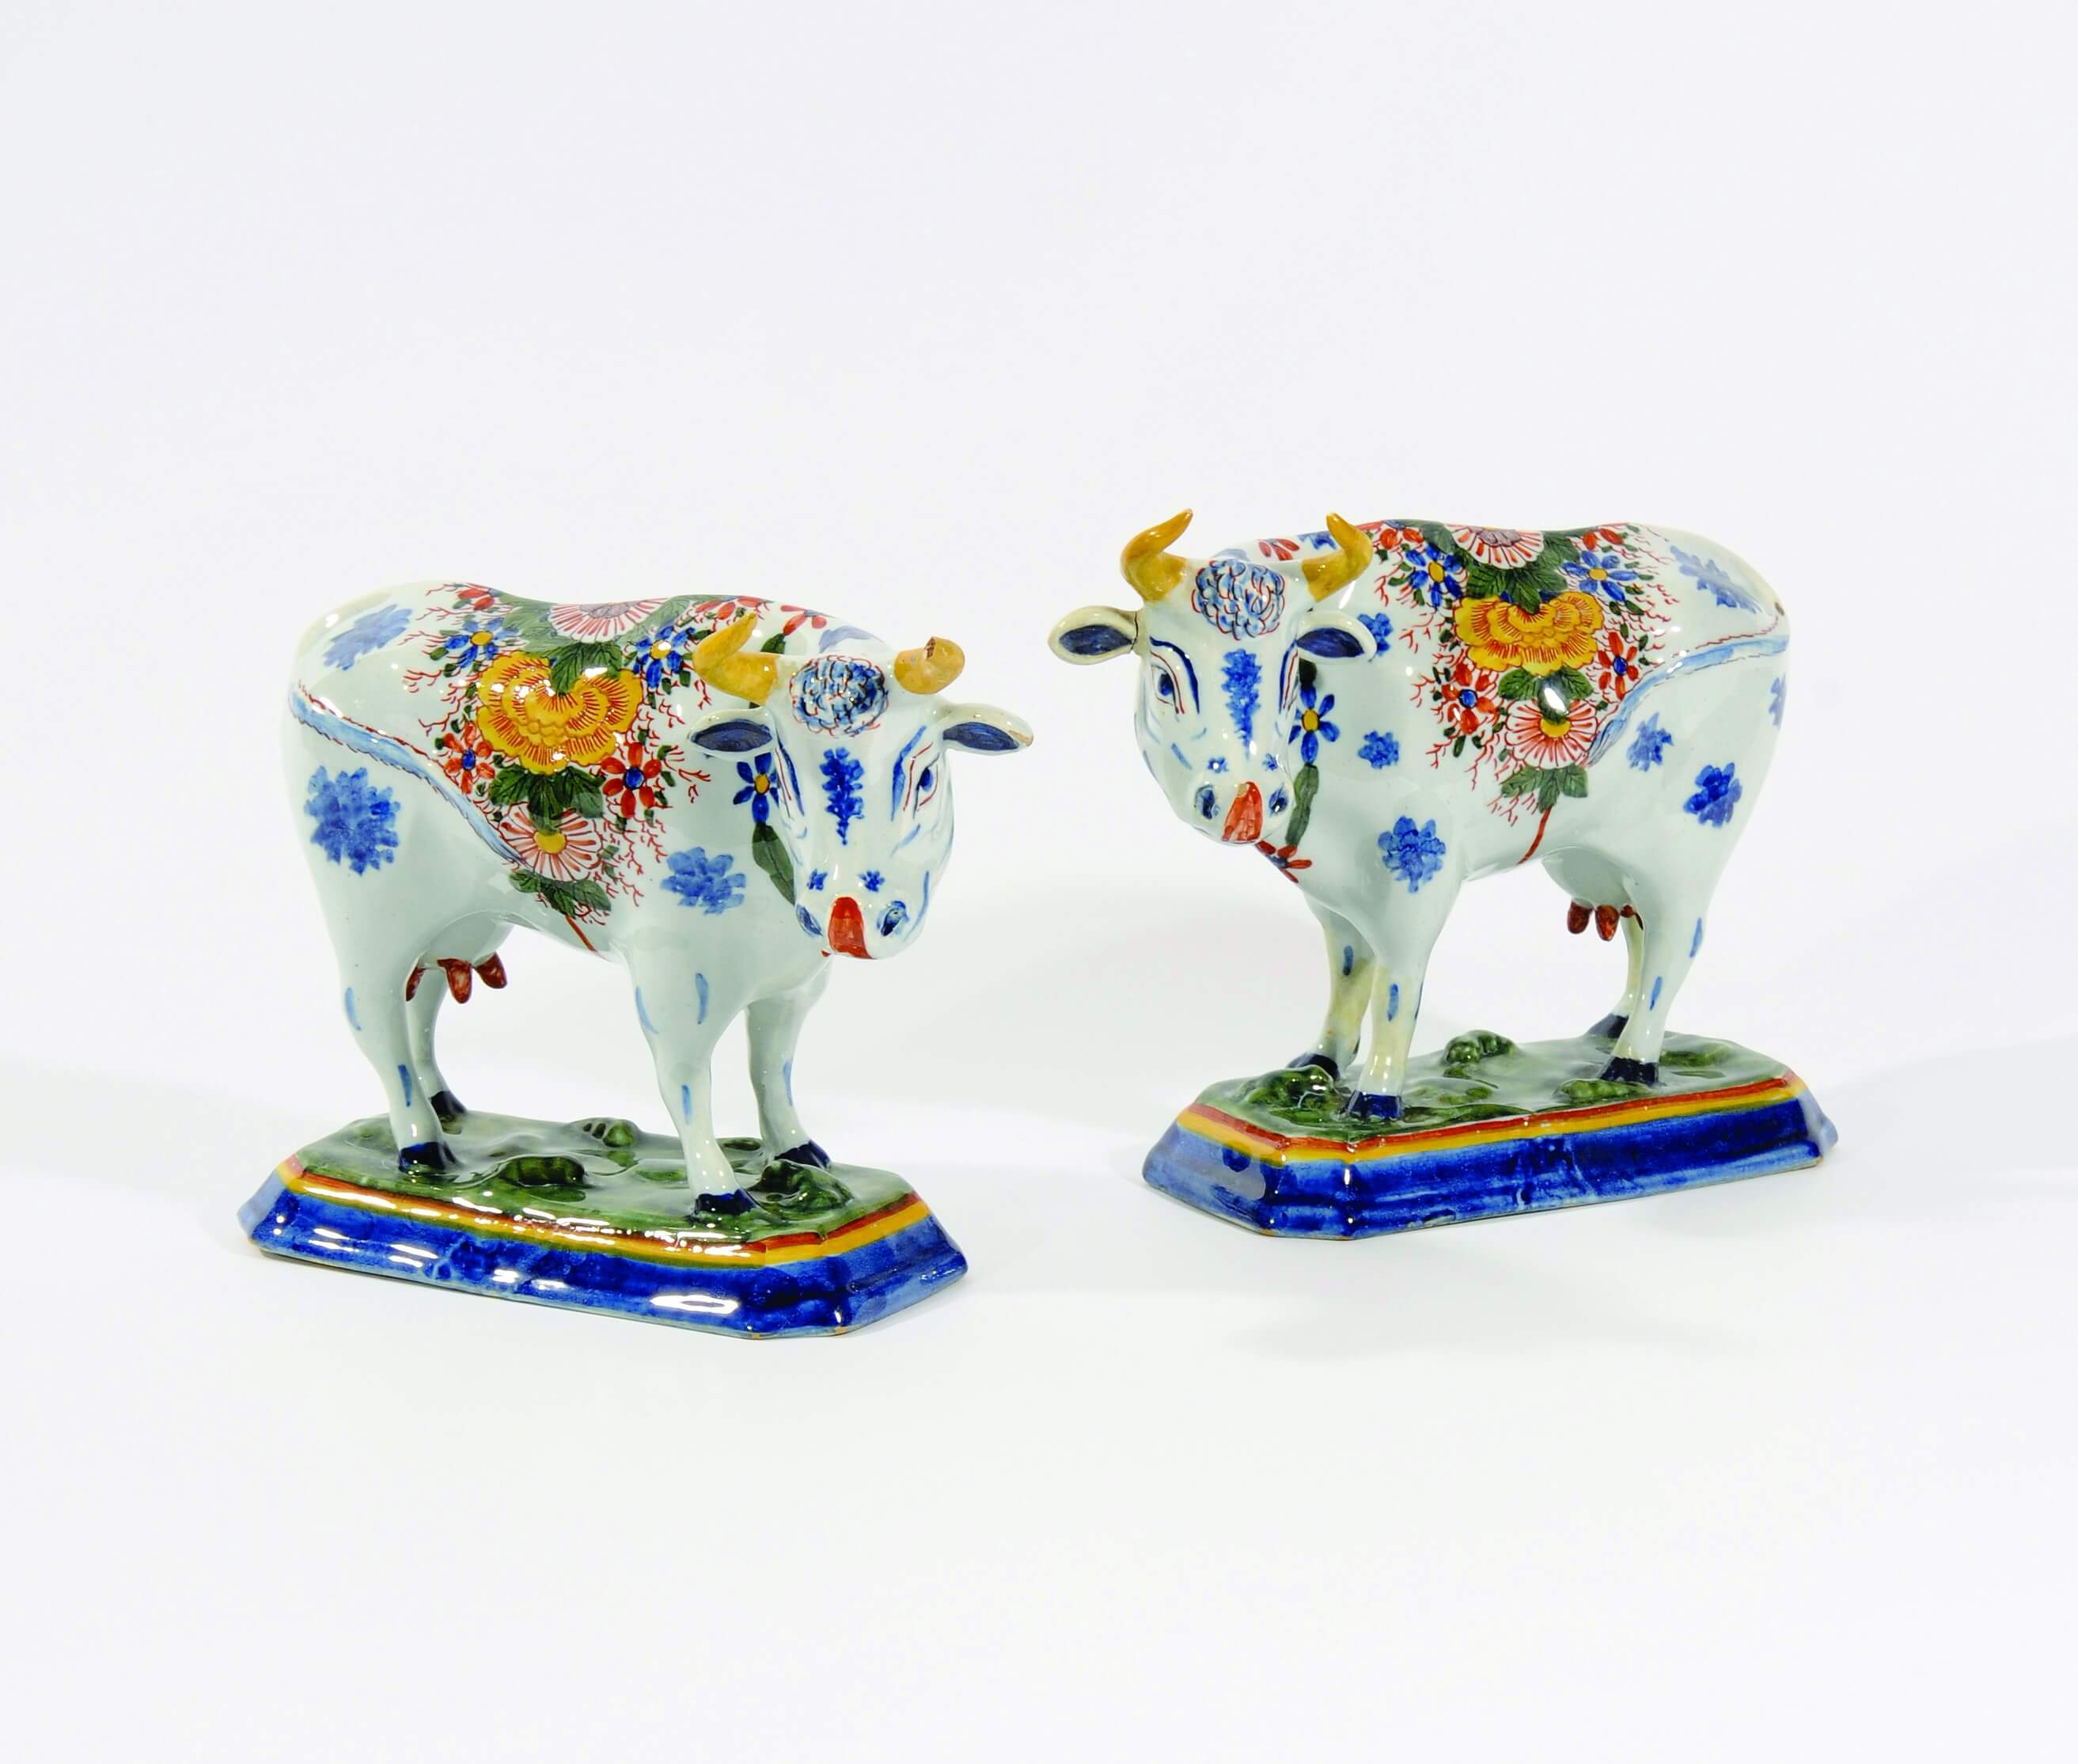 Antique polychrome cows and the history behind the delftware cows